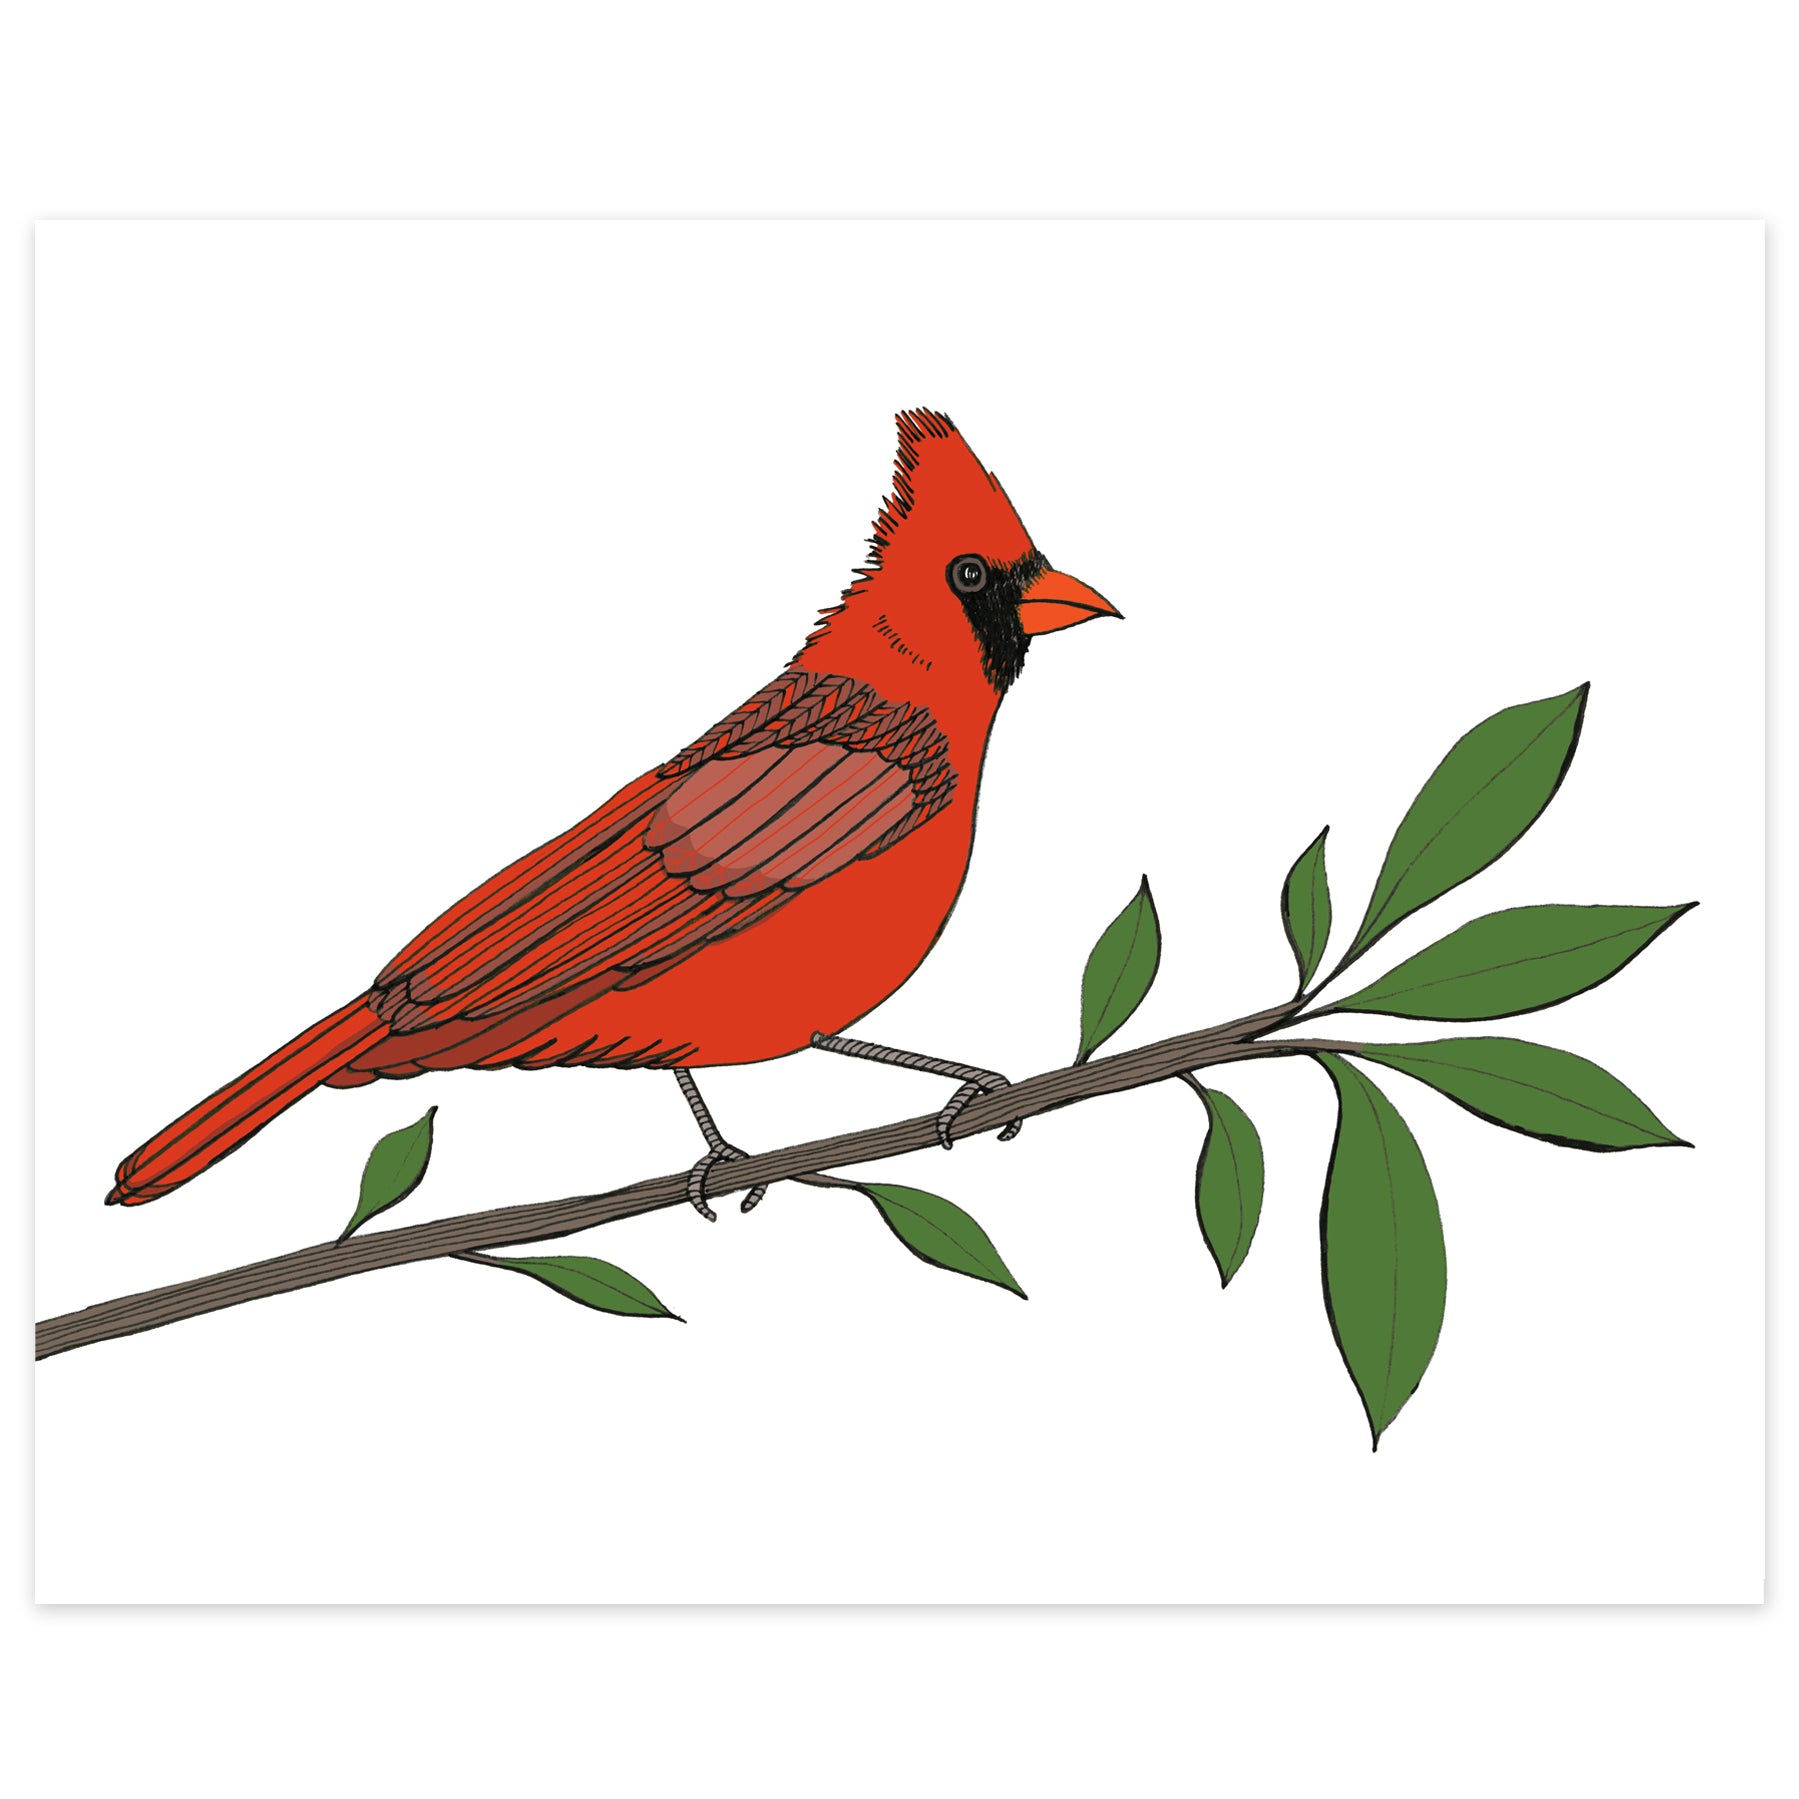 Majestic Red Cardinal on a Branch Print